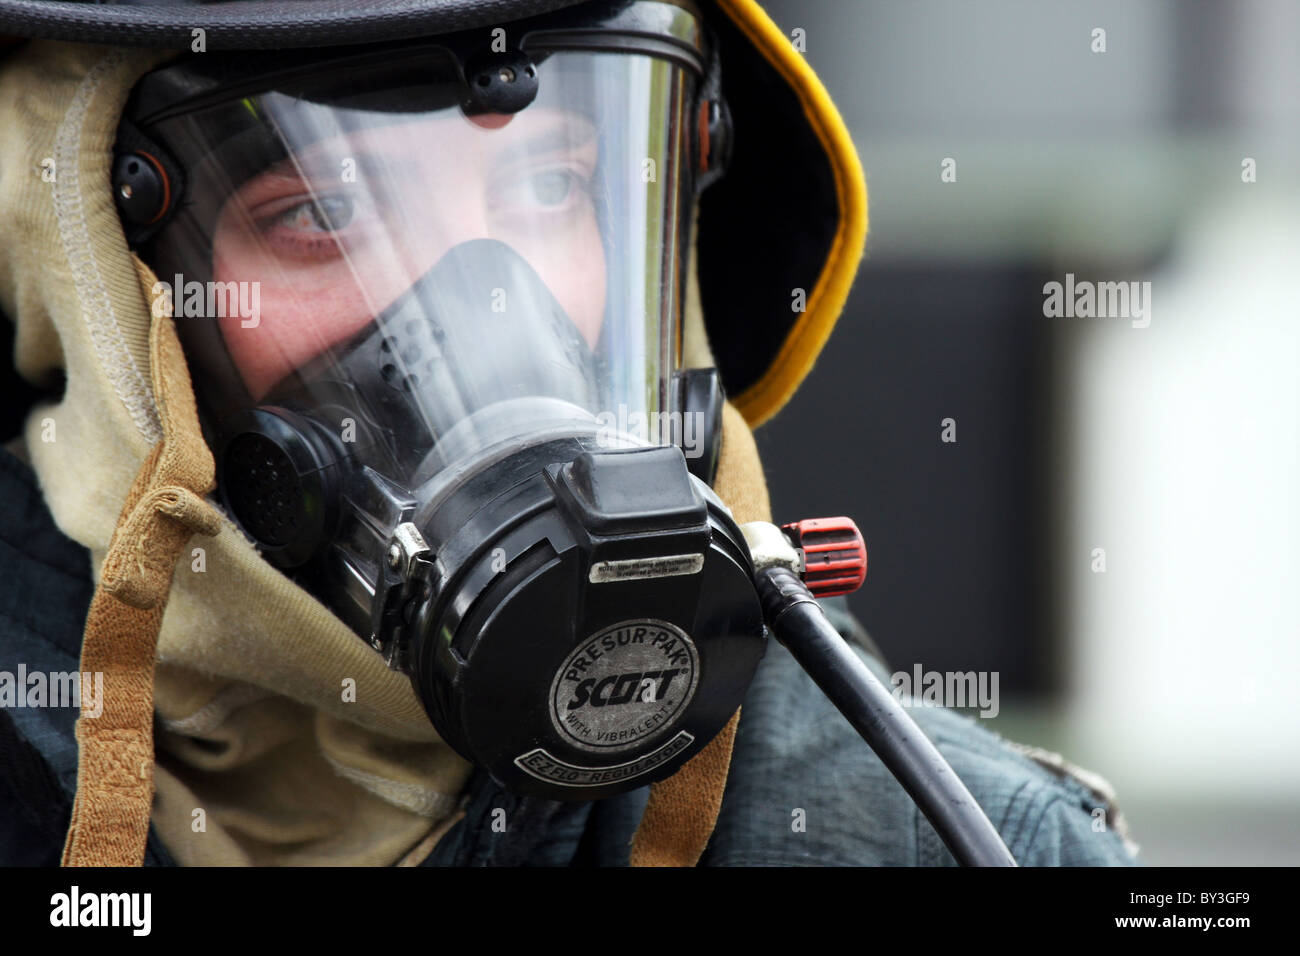 A firefighter in protective breathing gear and mask Stock Photo